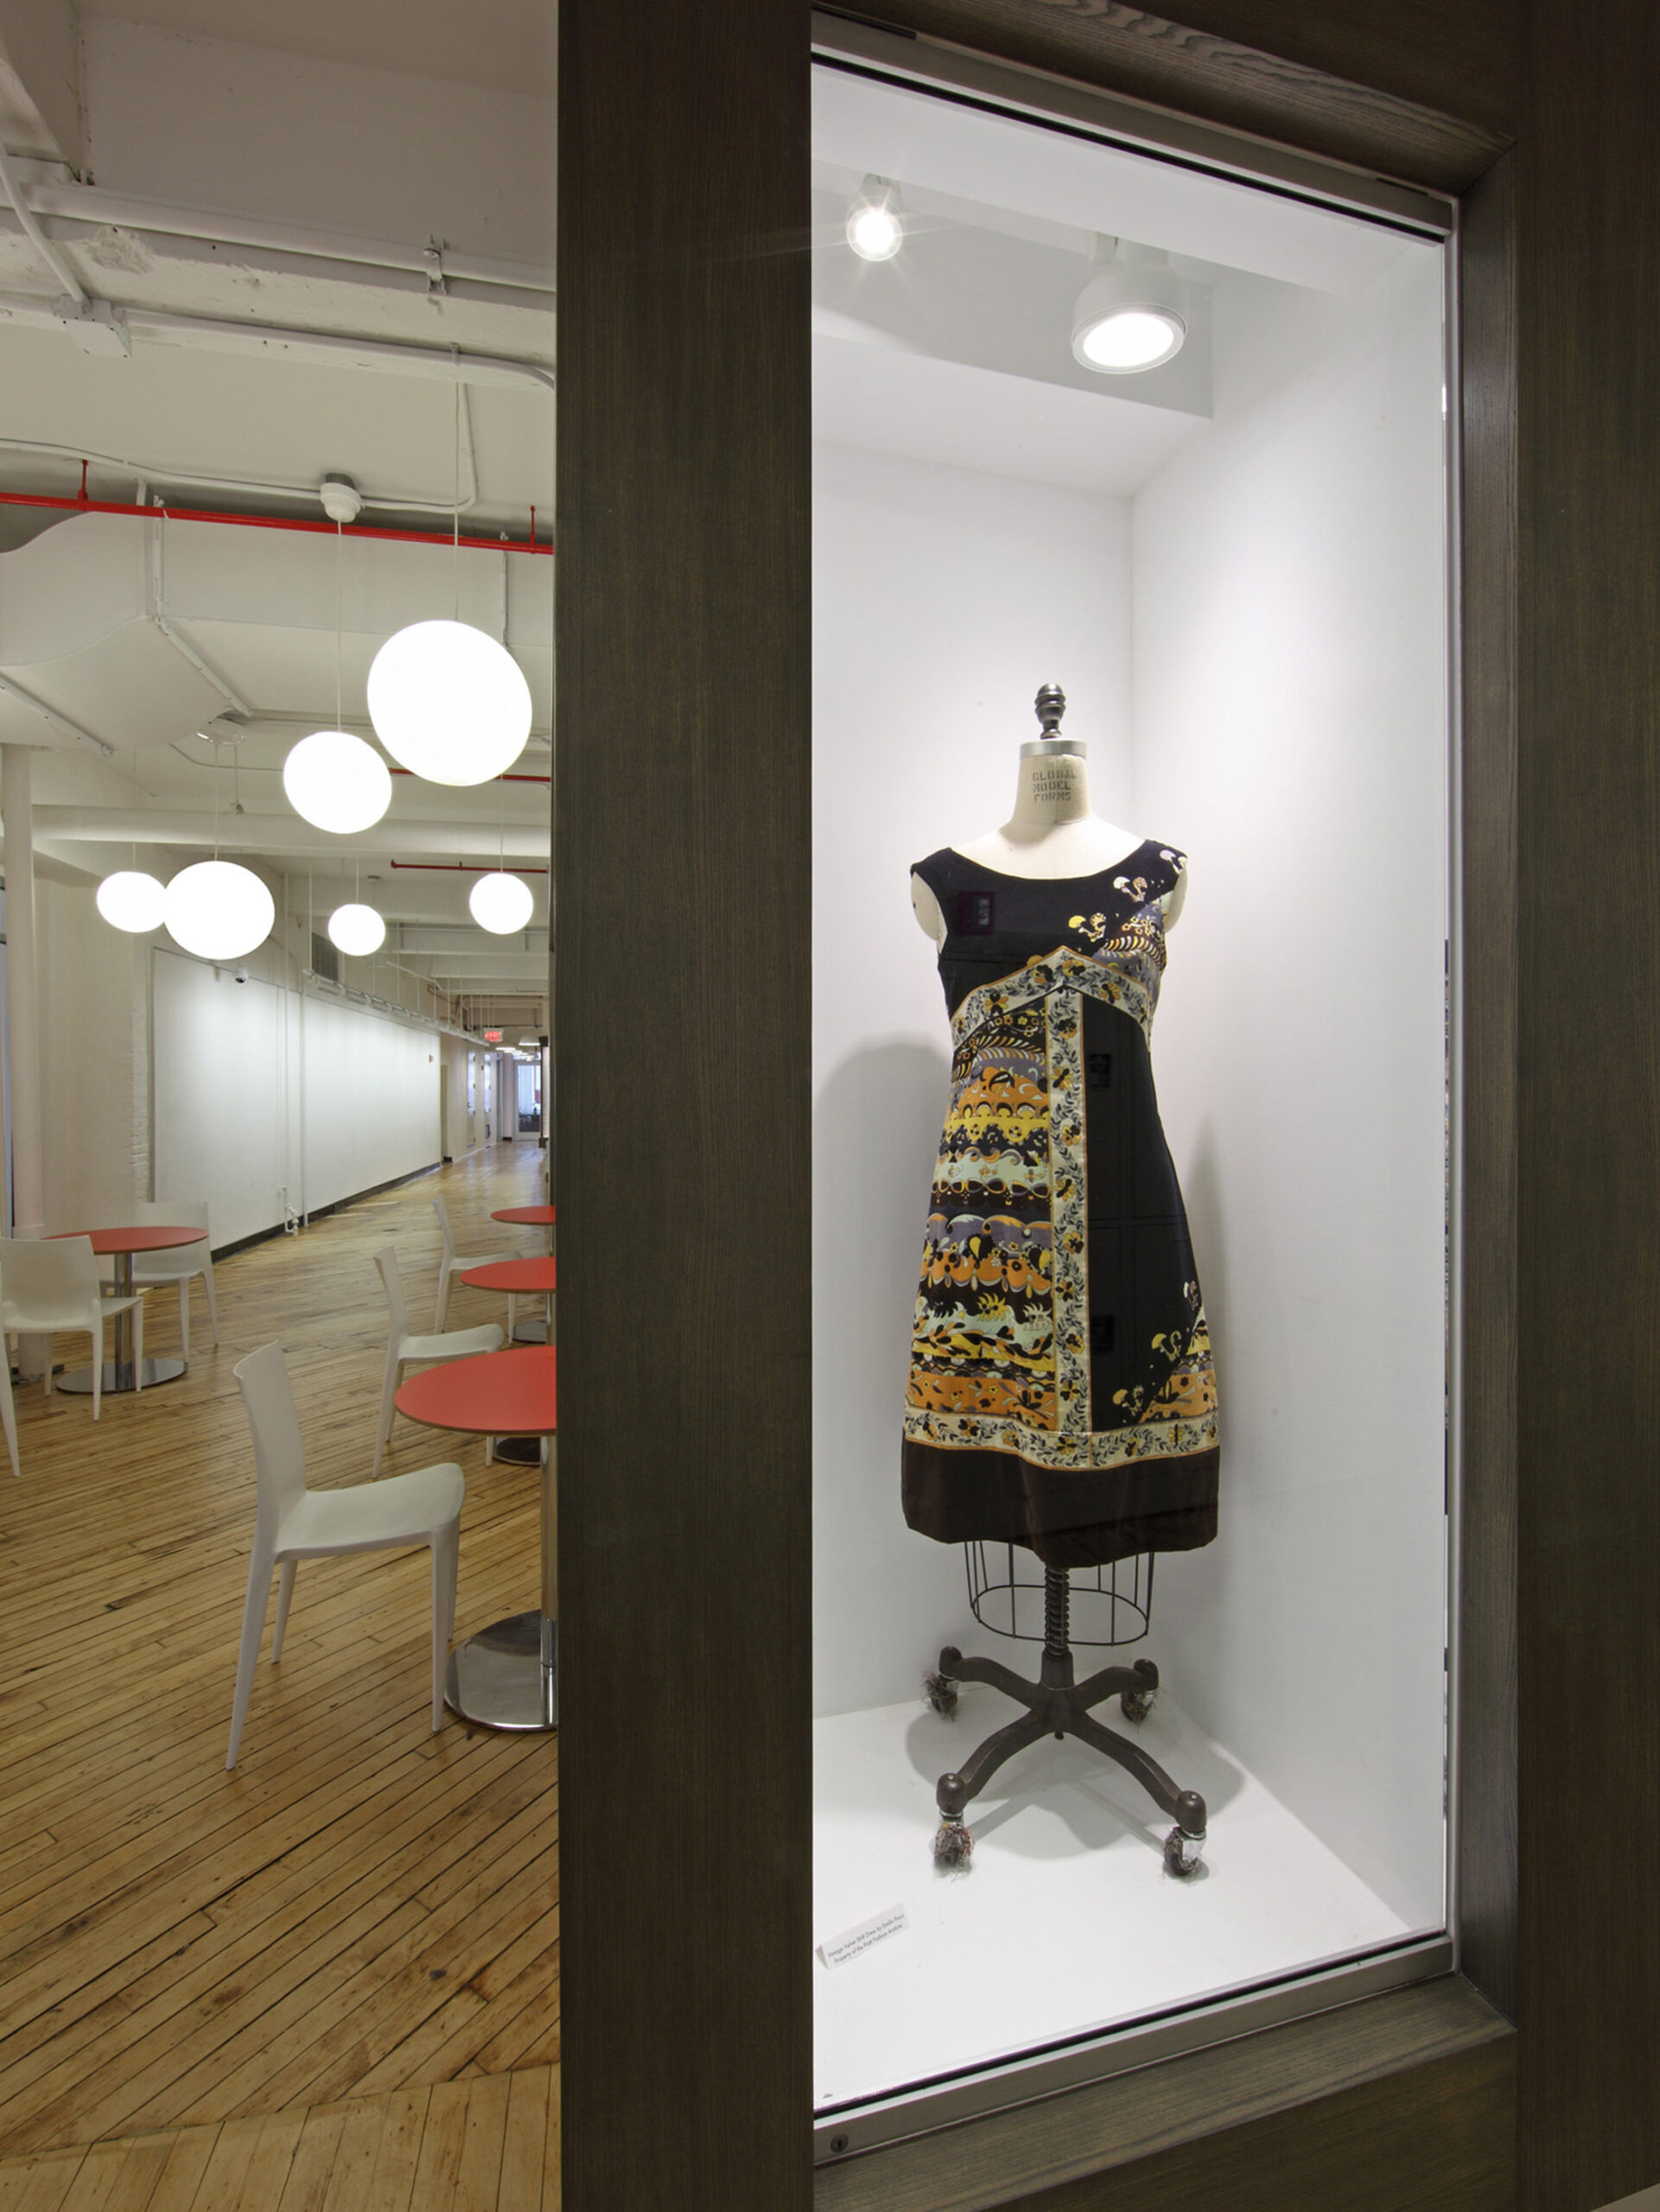 Vintage mannequin displaying an ornate dress, framed by a minimalist storefront window, with the backdrop of a modern, open-concept interior featuring sleek furniture and bold red ceiling-mounted pipes.